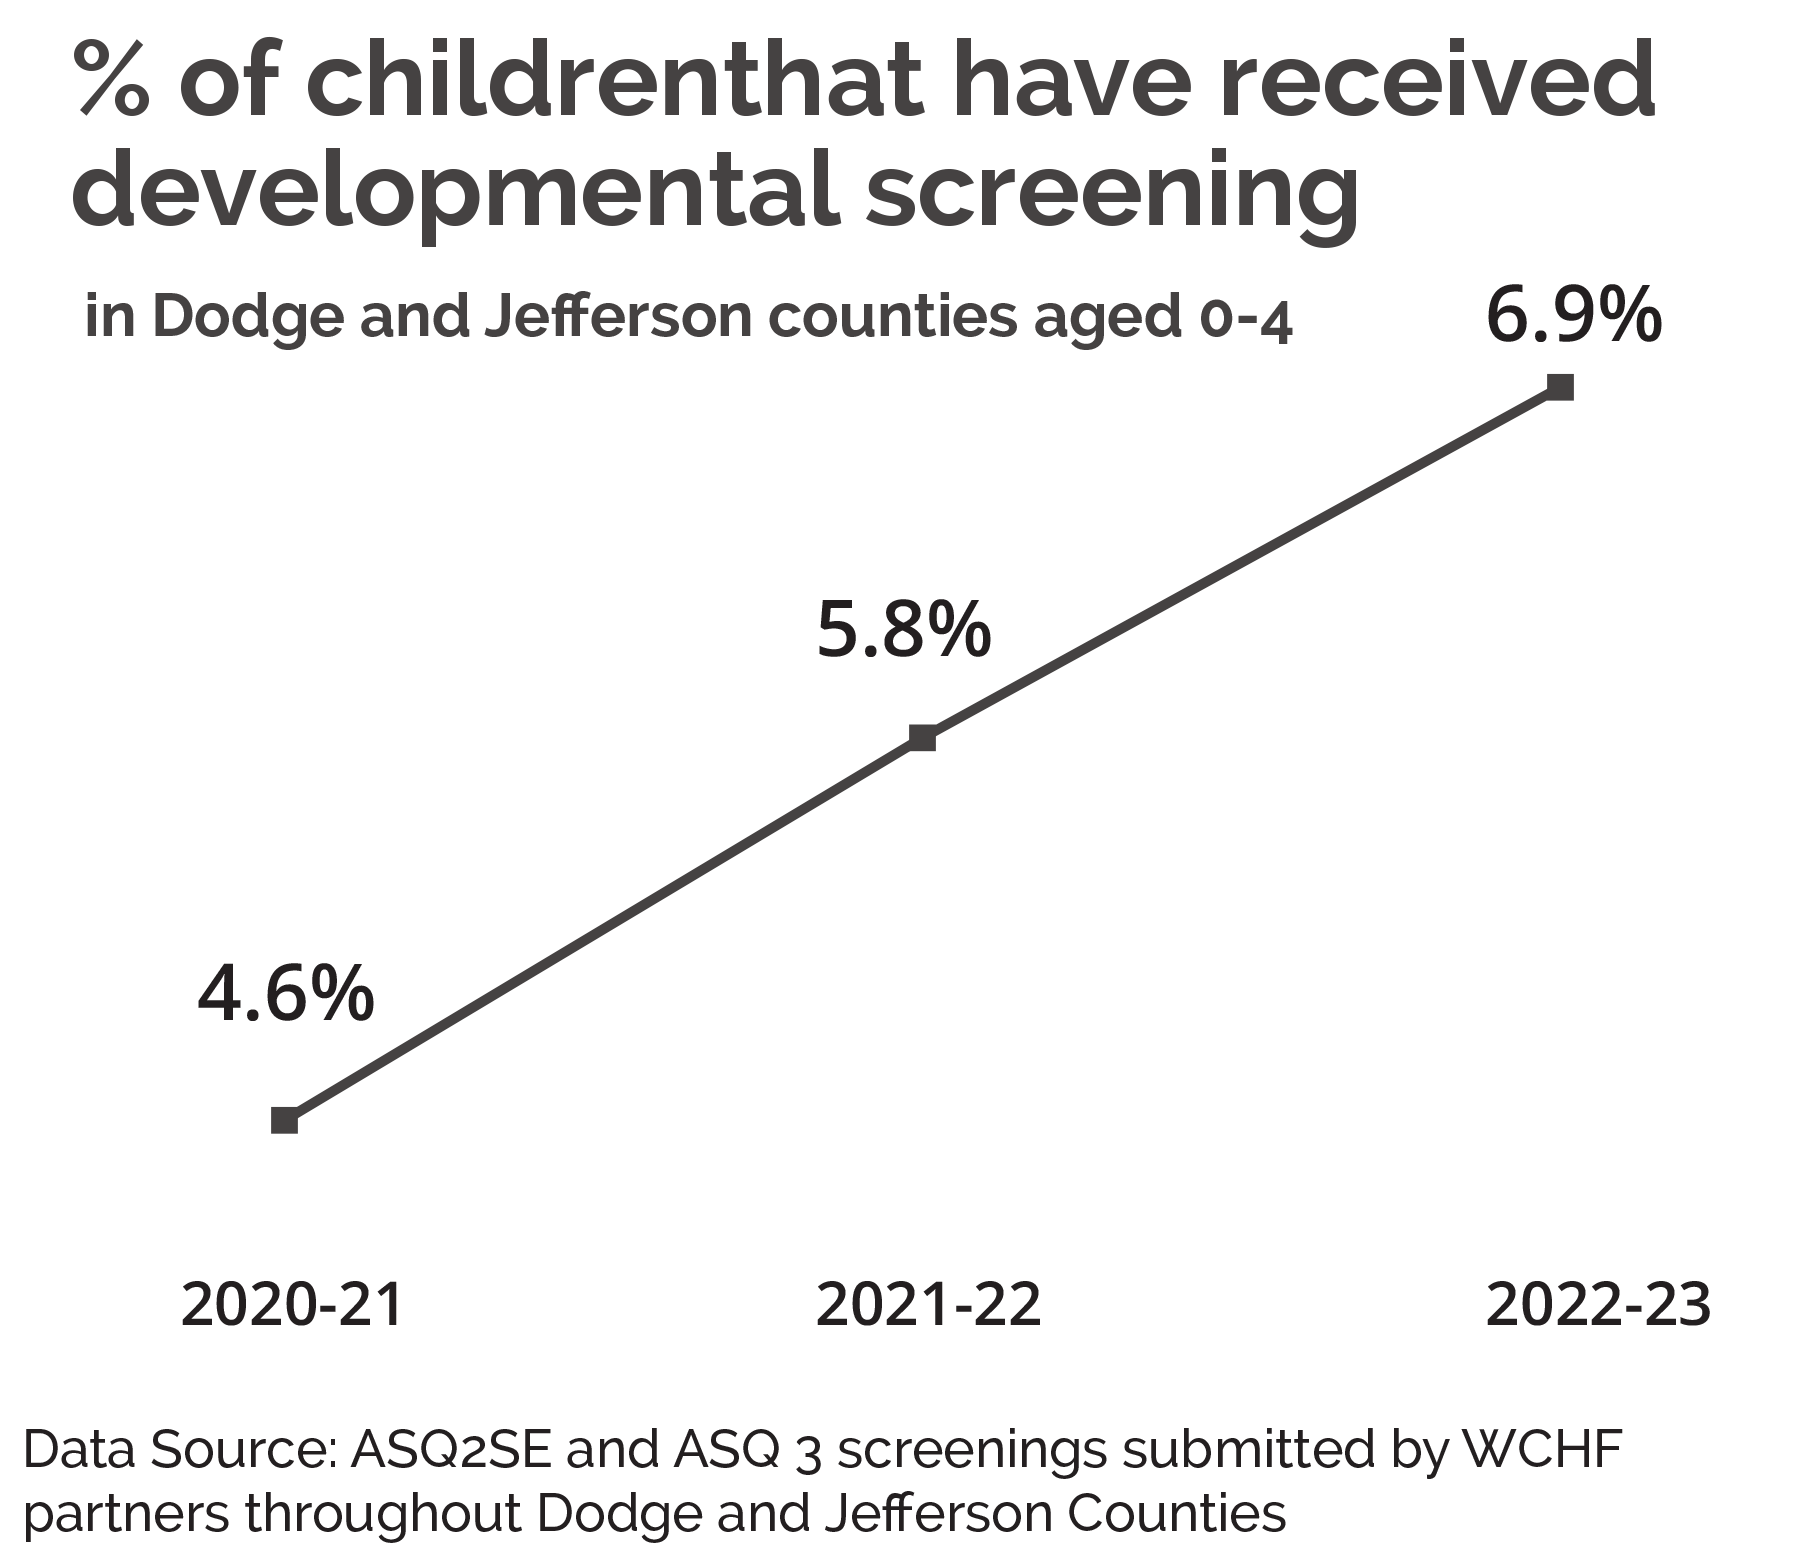 How well: % of children in primary service area aged 0-4 that have received developmental screening